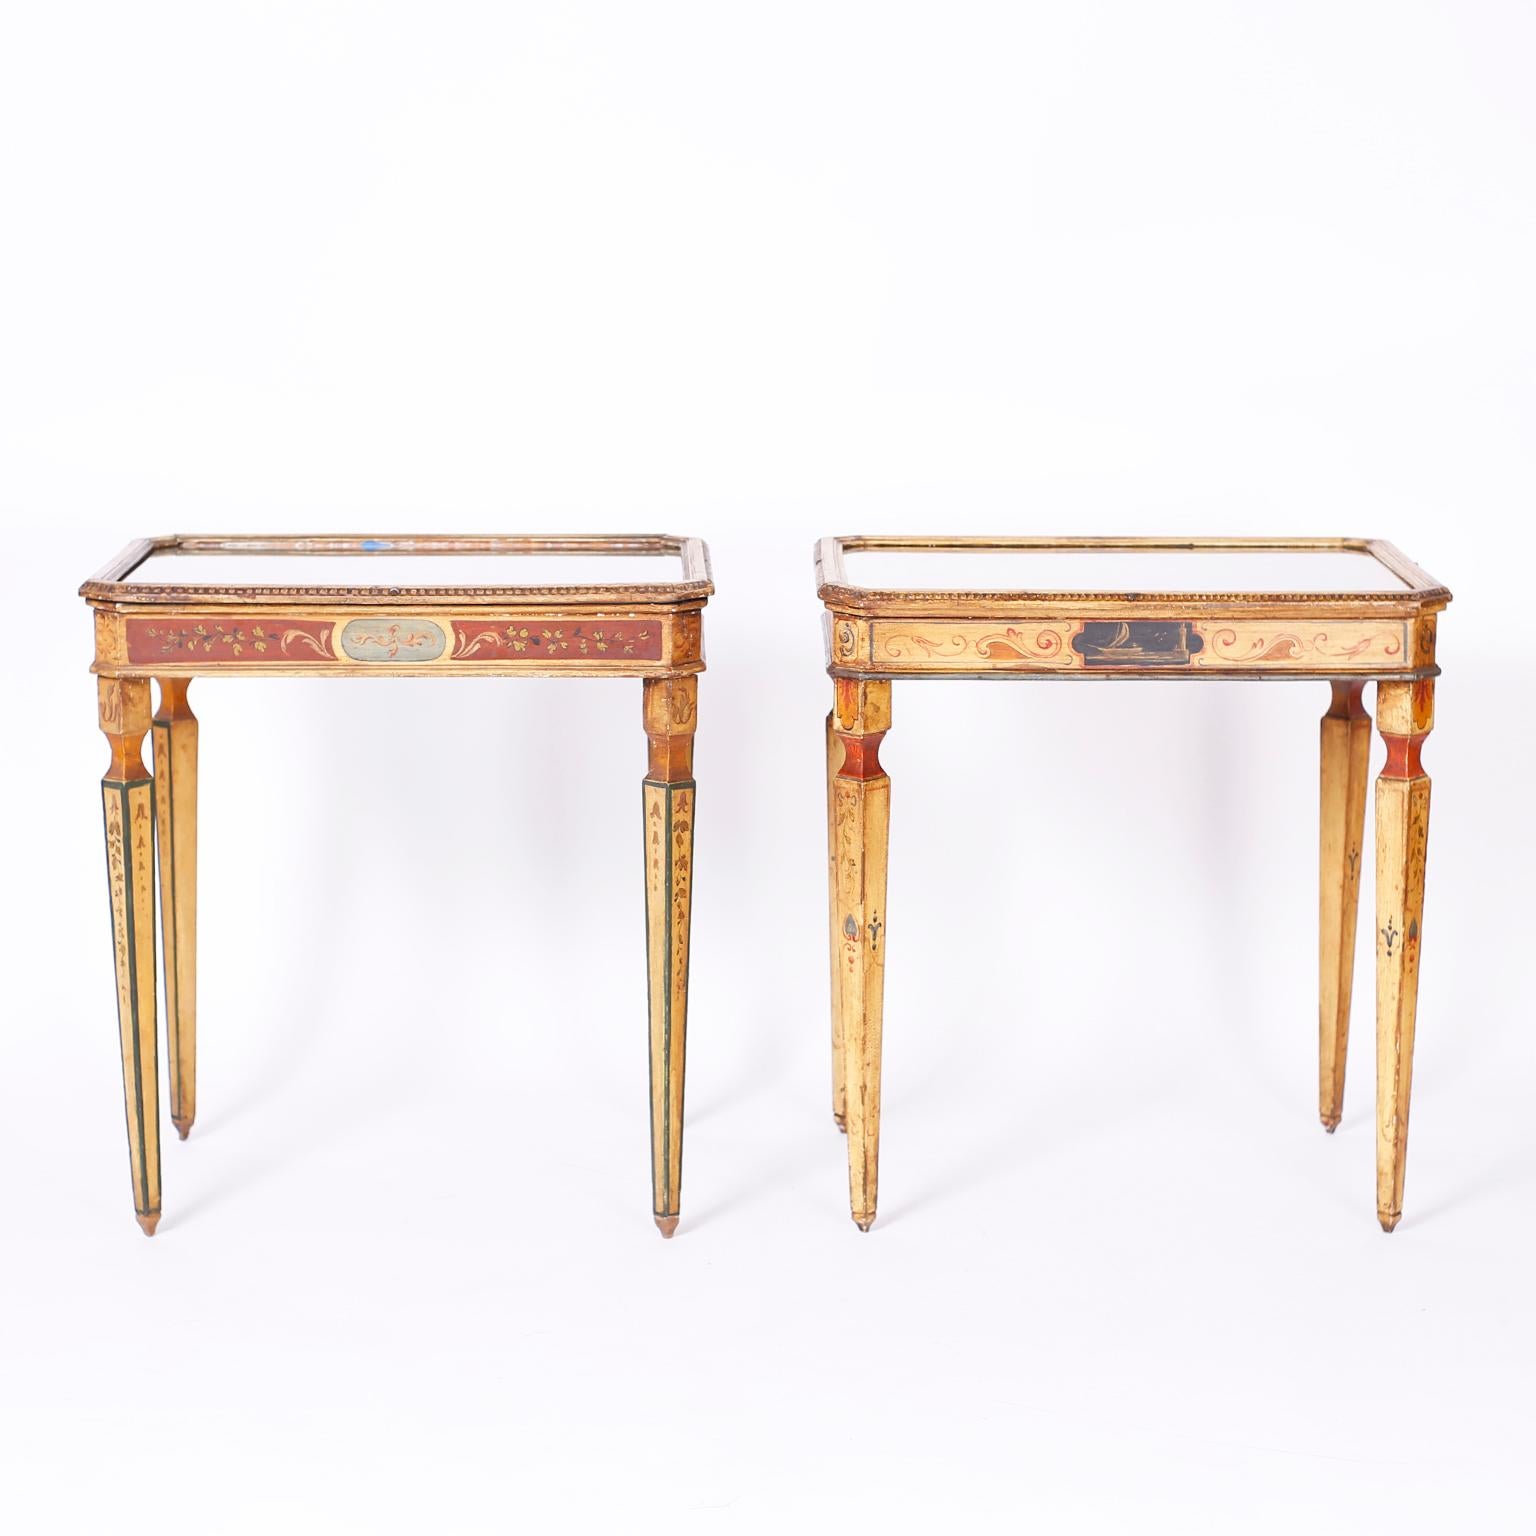 Hand-Painted Near Pair of Venetian Painted Neoclassical Style Tables